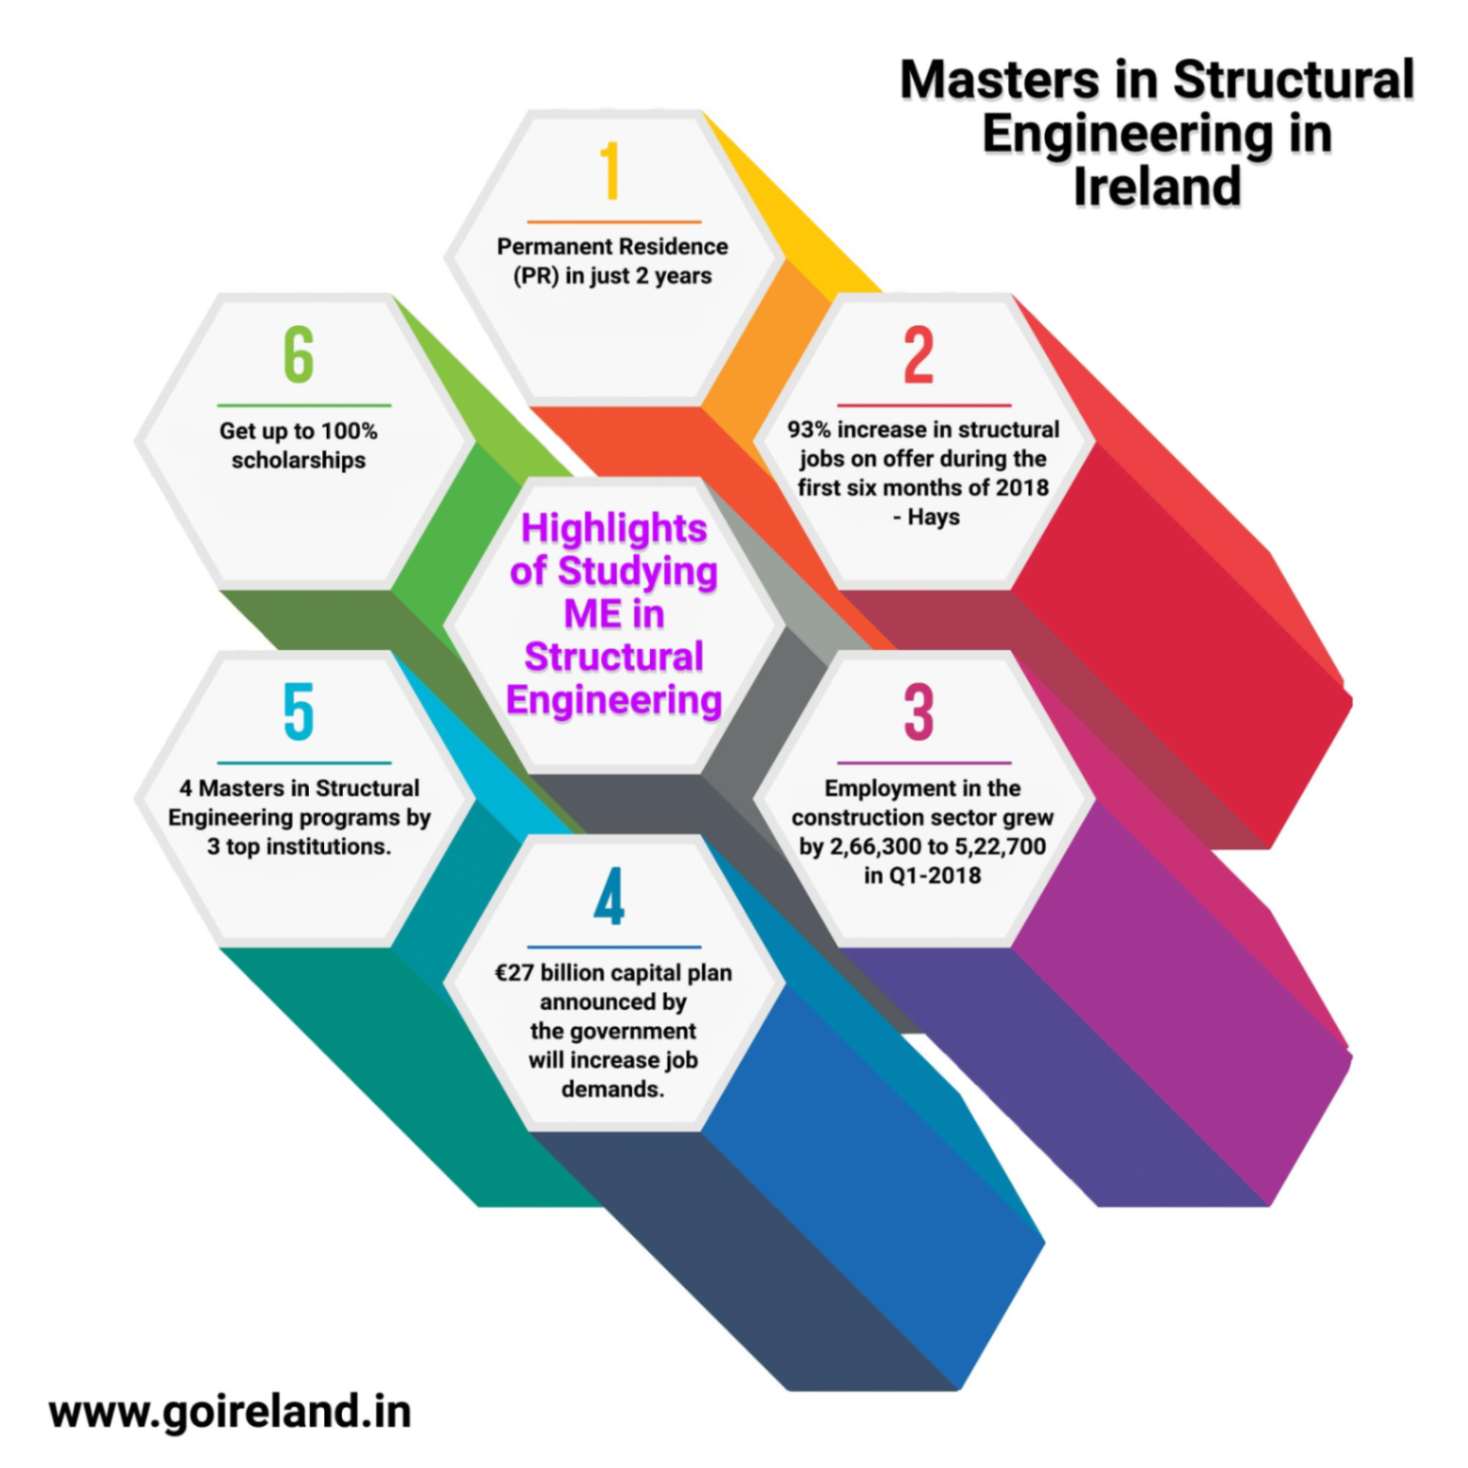 Masters in Structural Engineering in Ireland